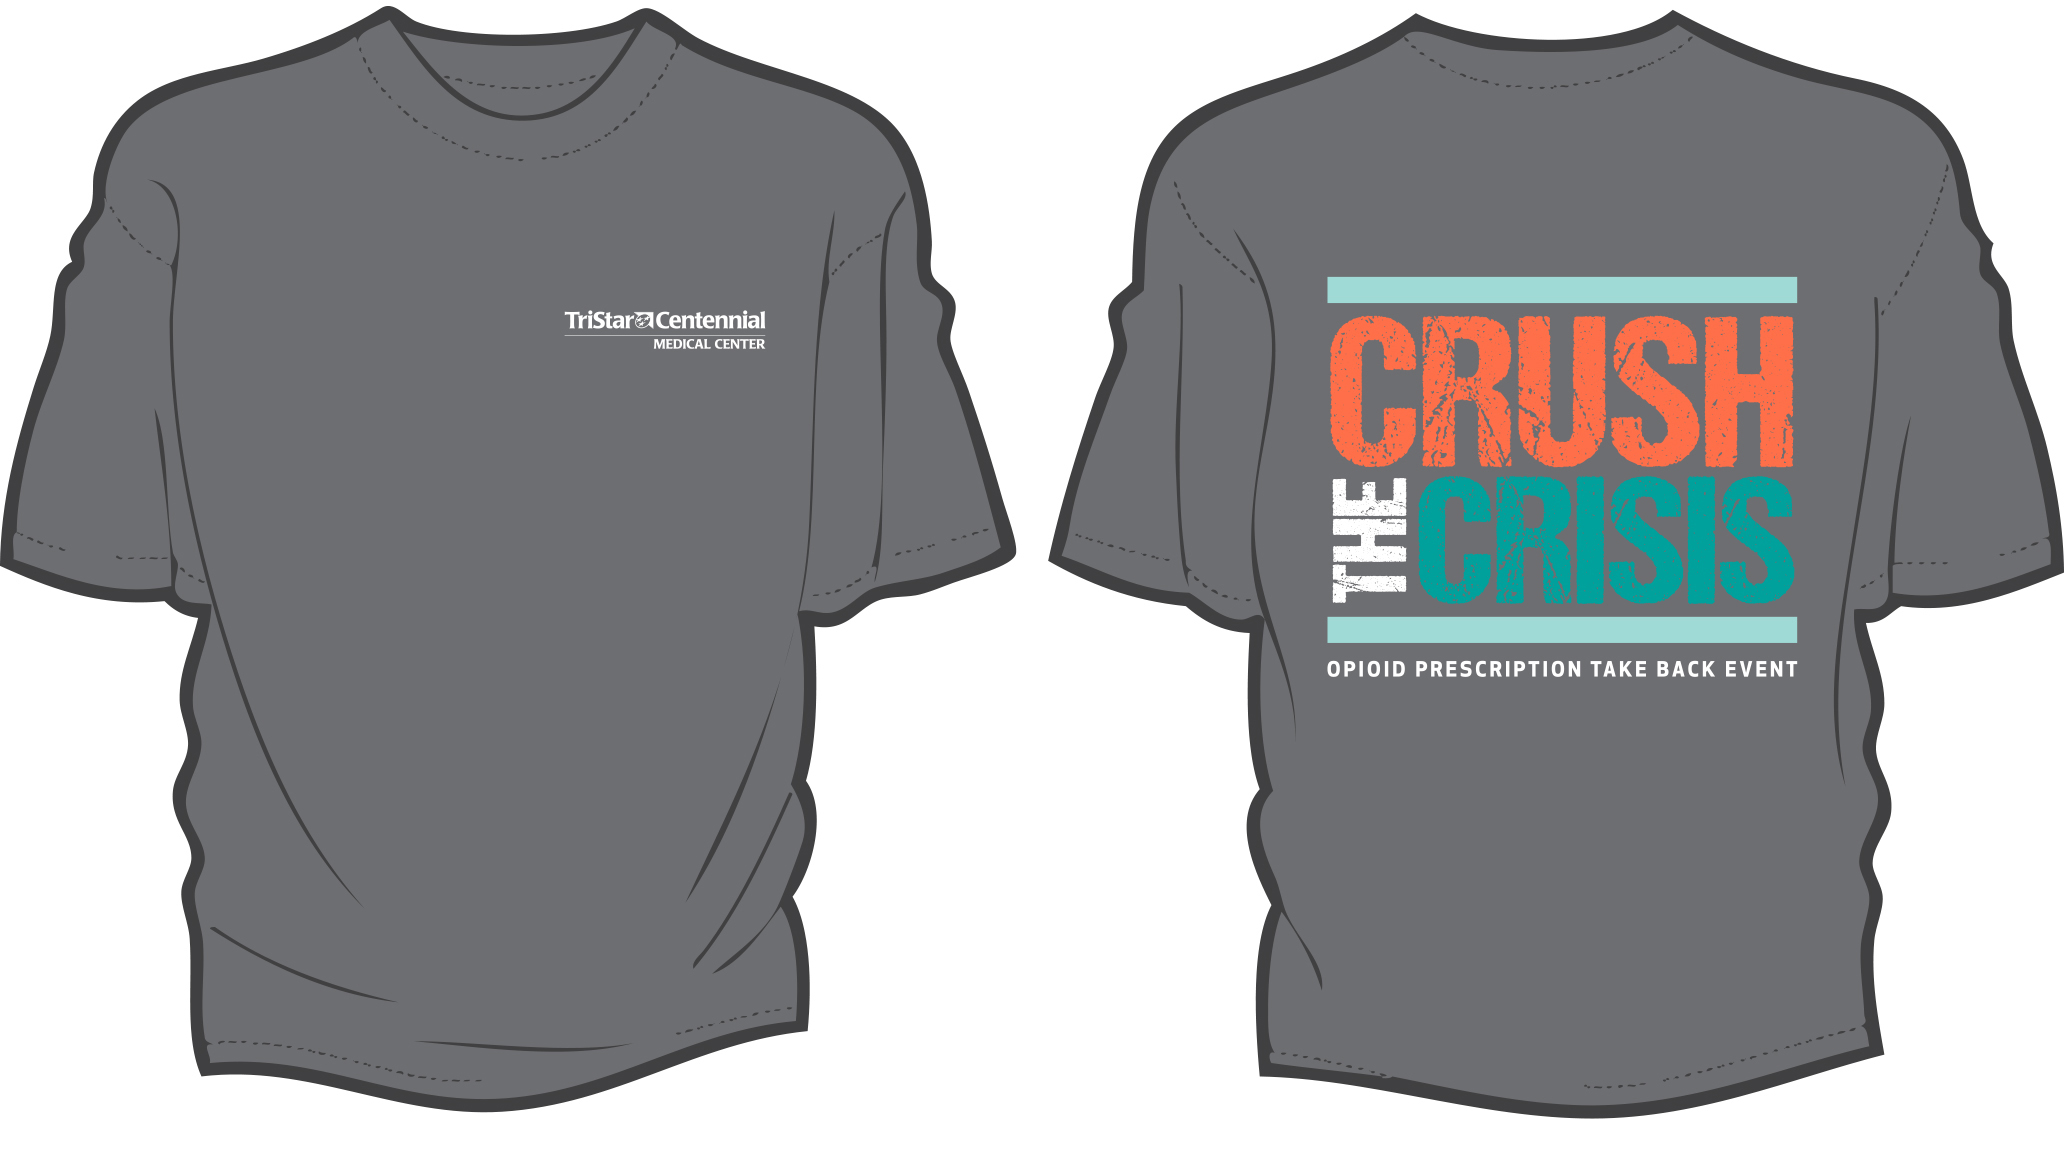 Rendering of the front and back of the Crush the Crisis T-shirt